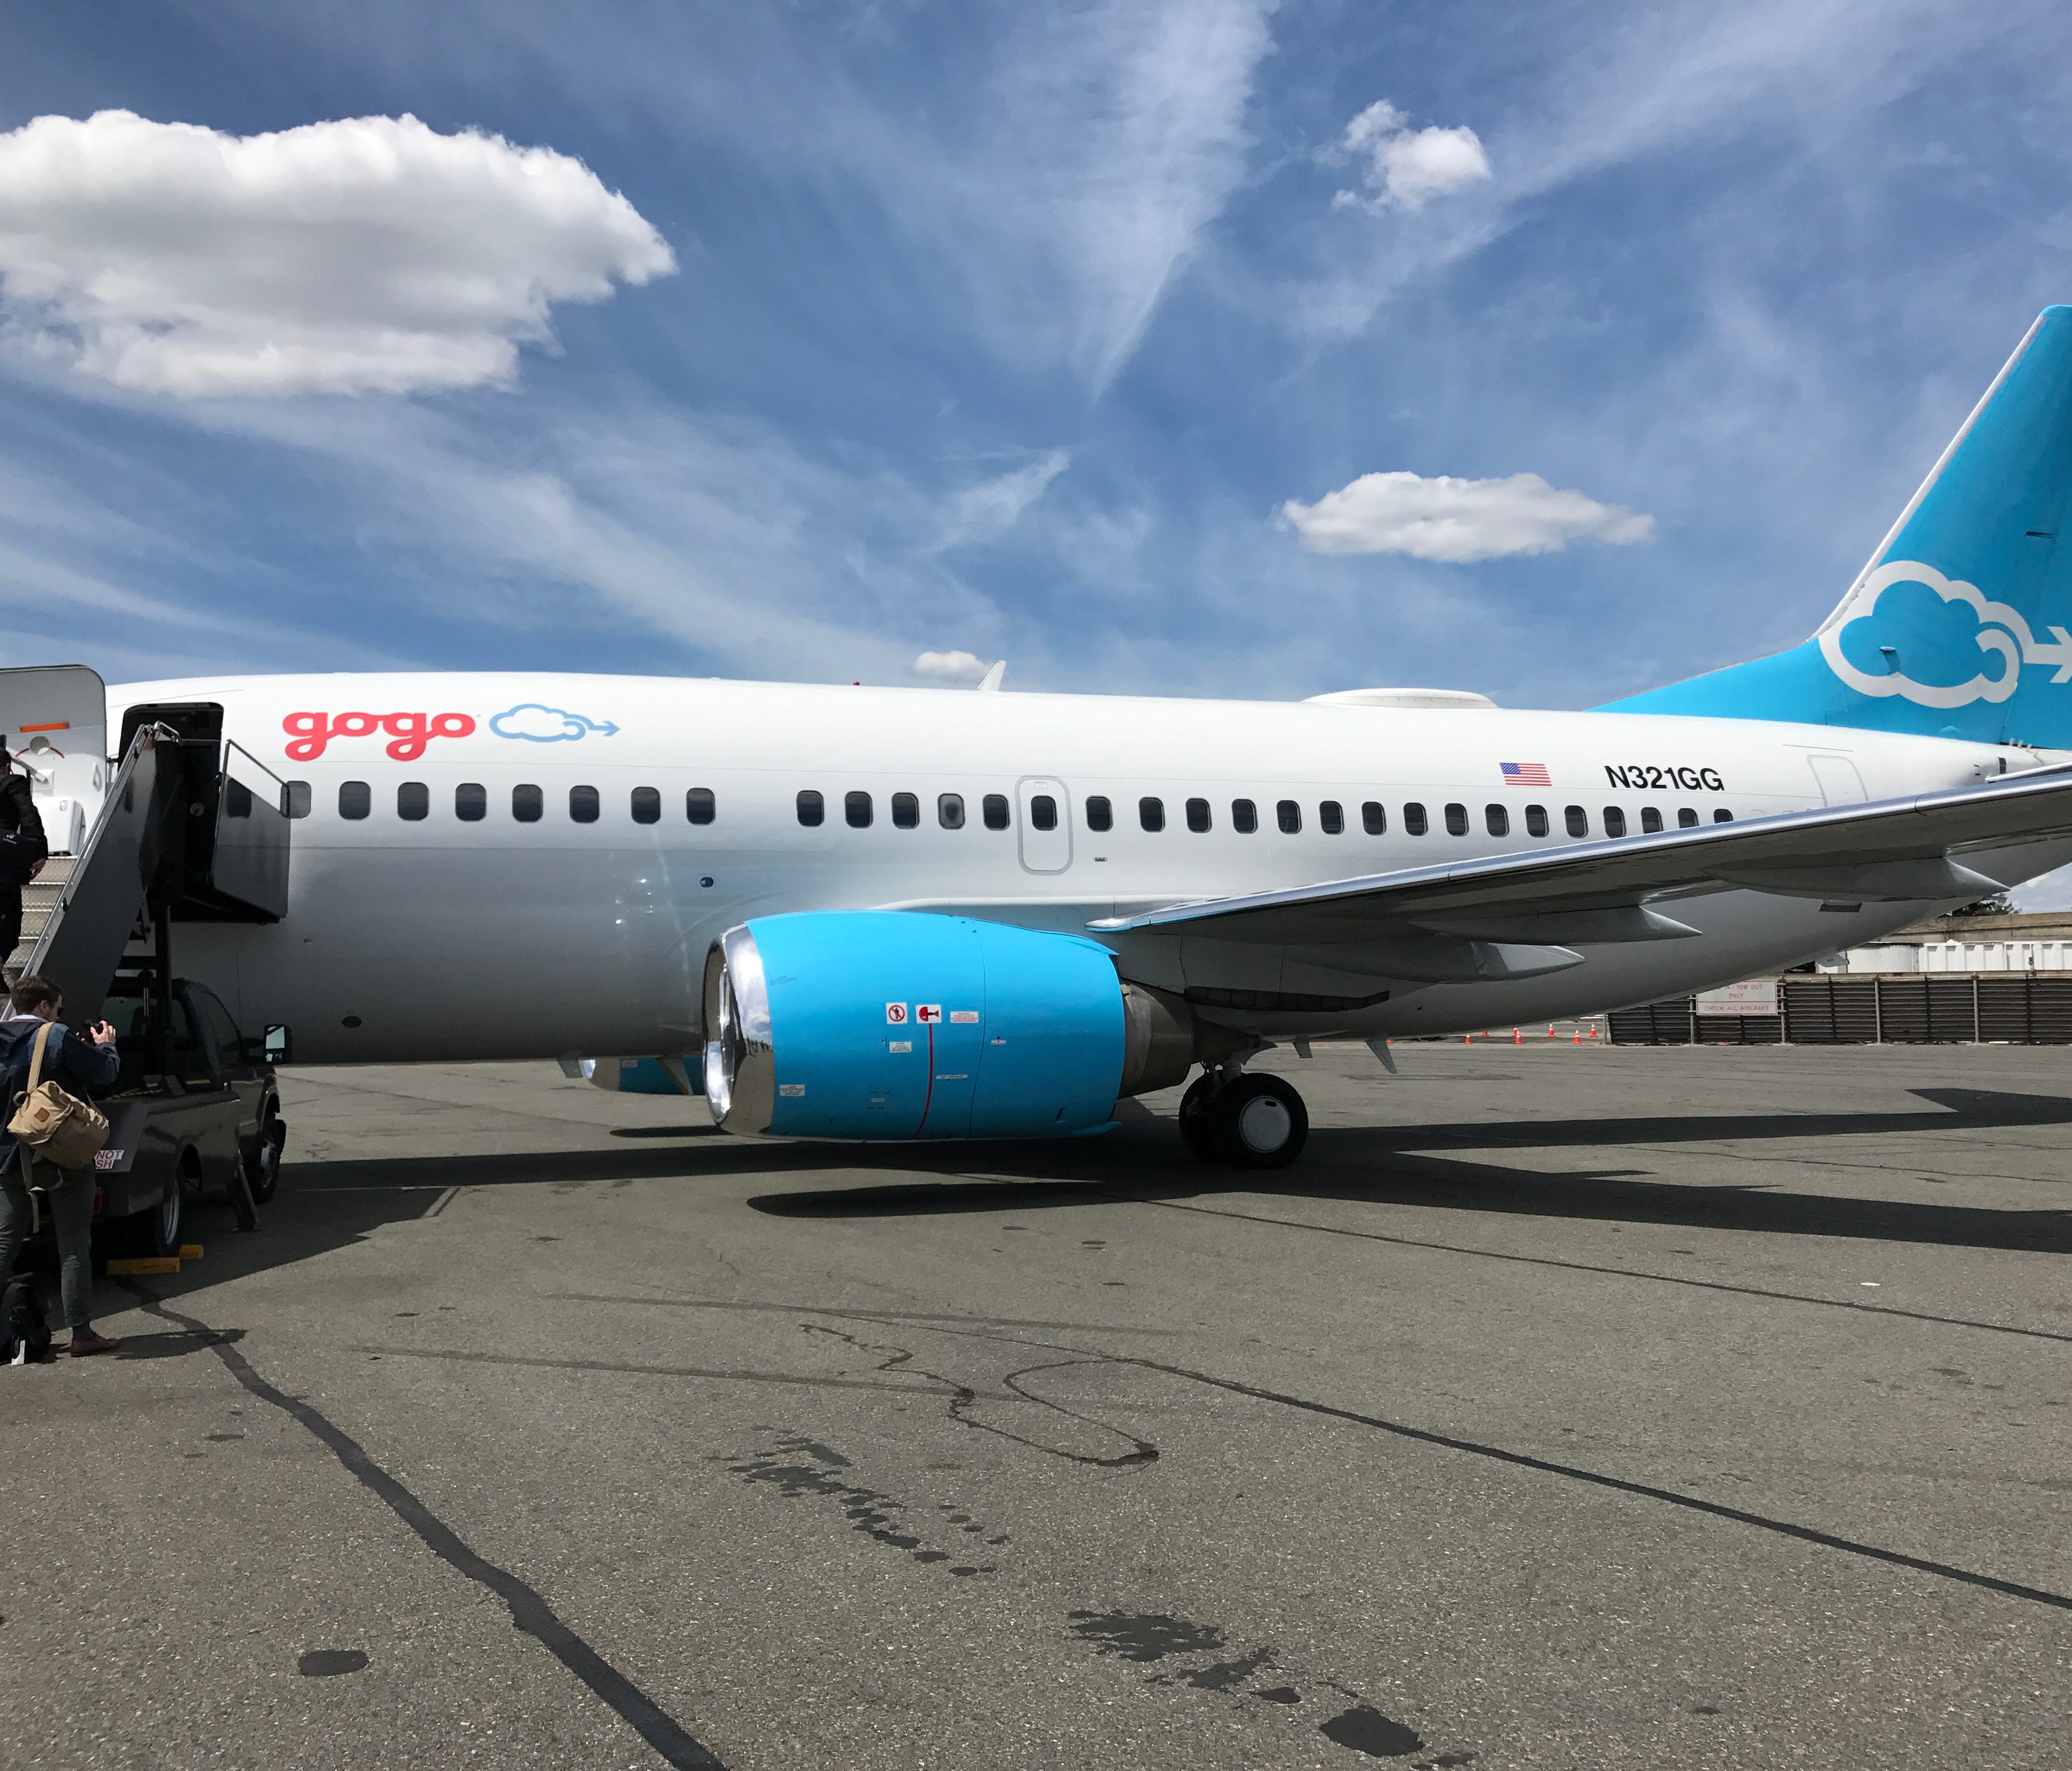 This 737-500 plane is Gogo's flying lab.